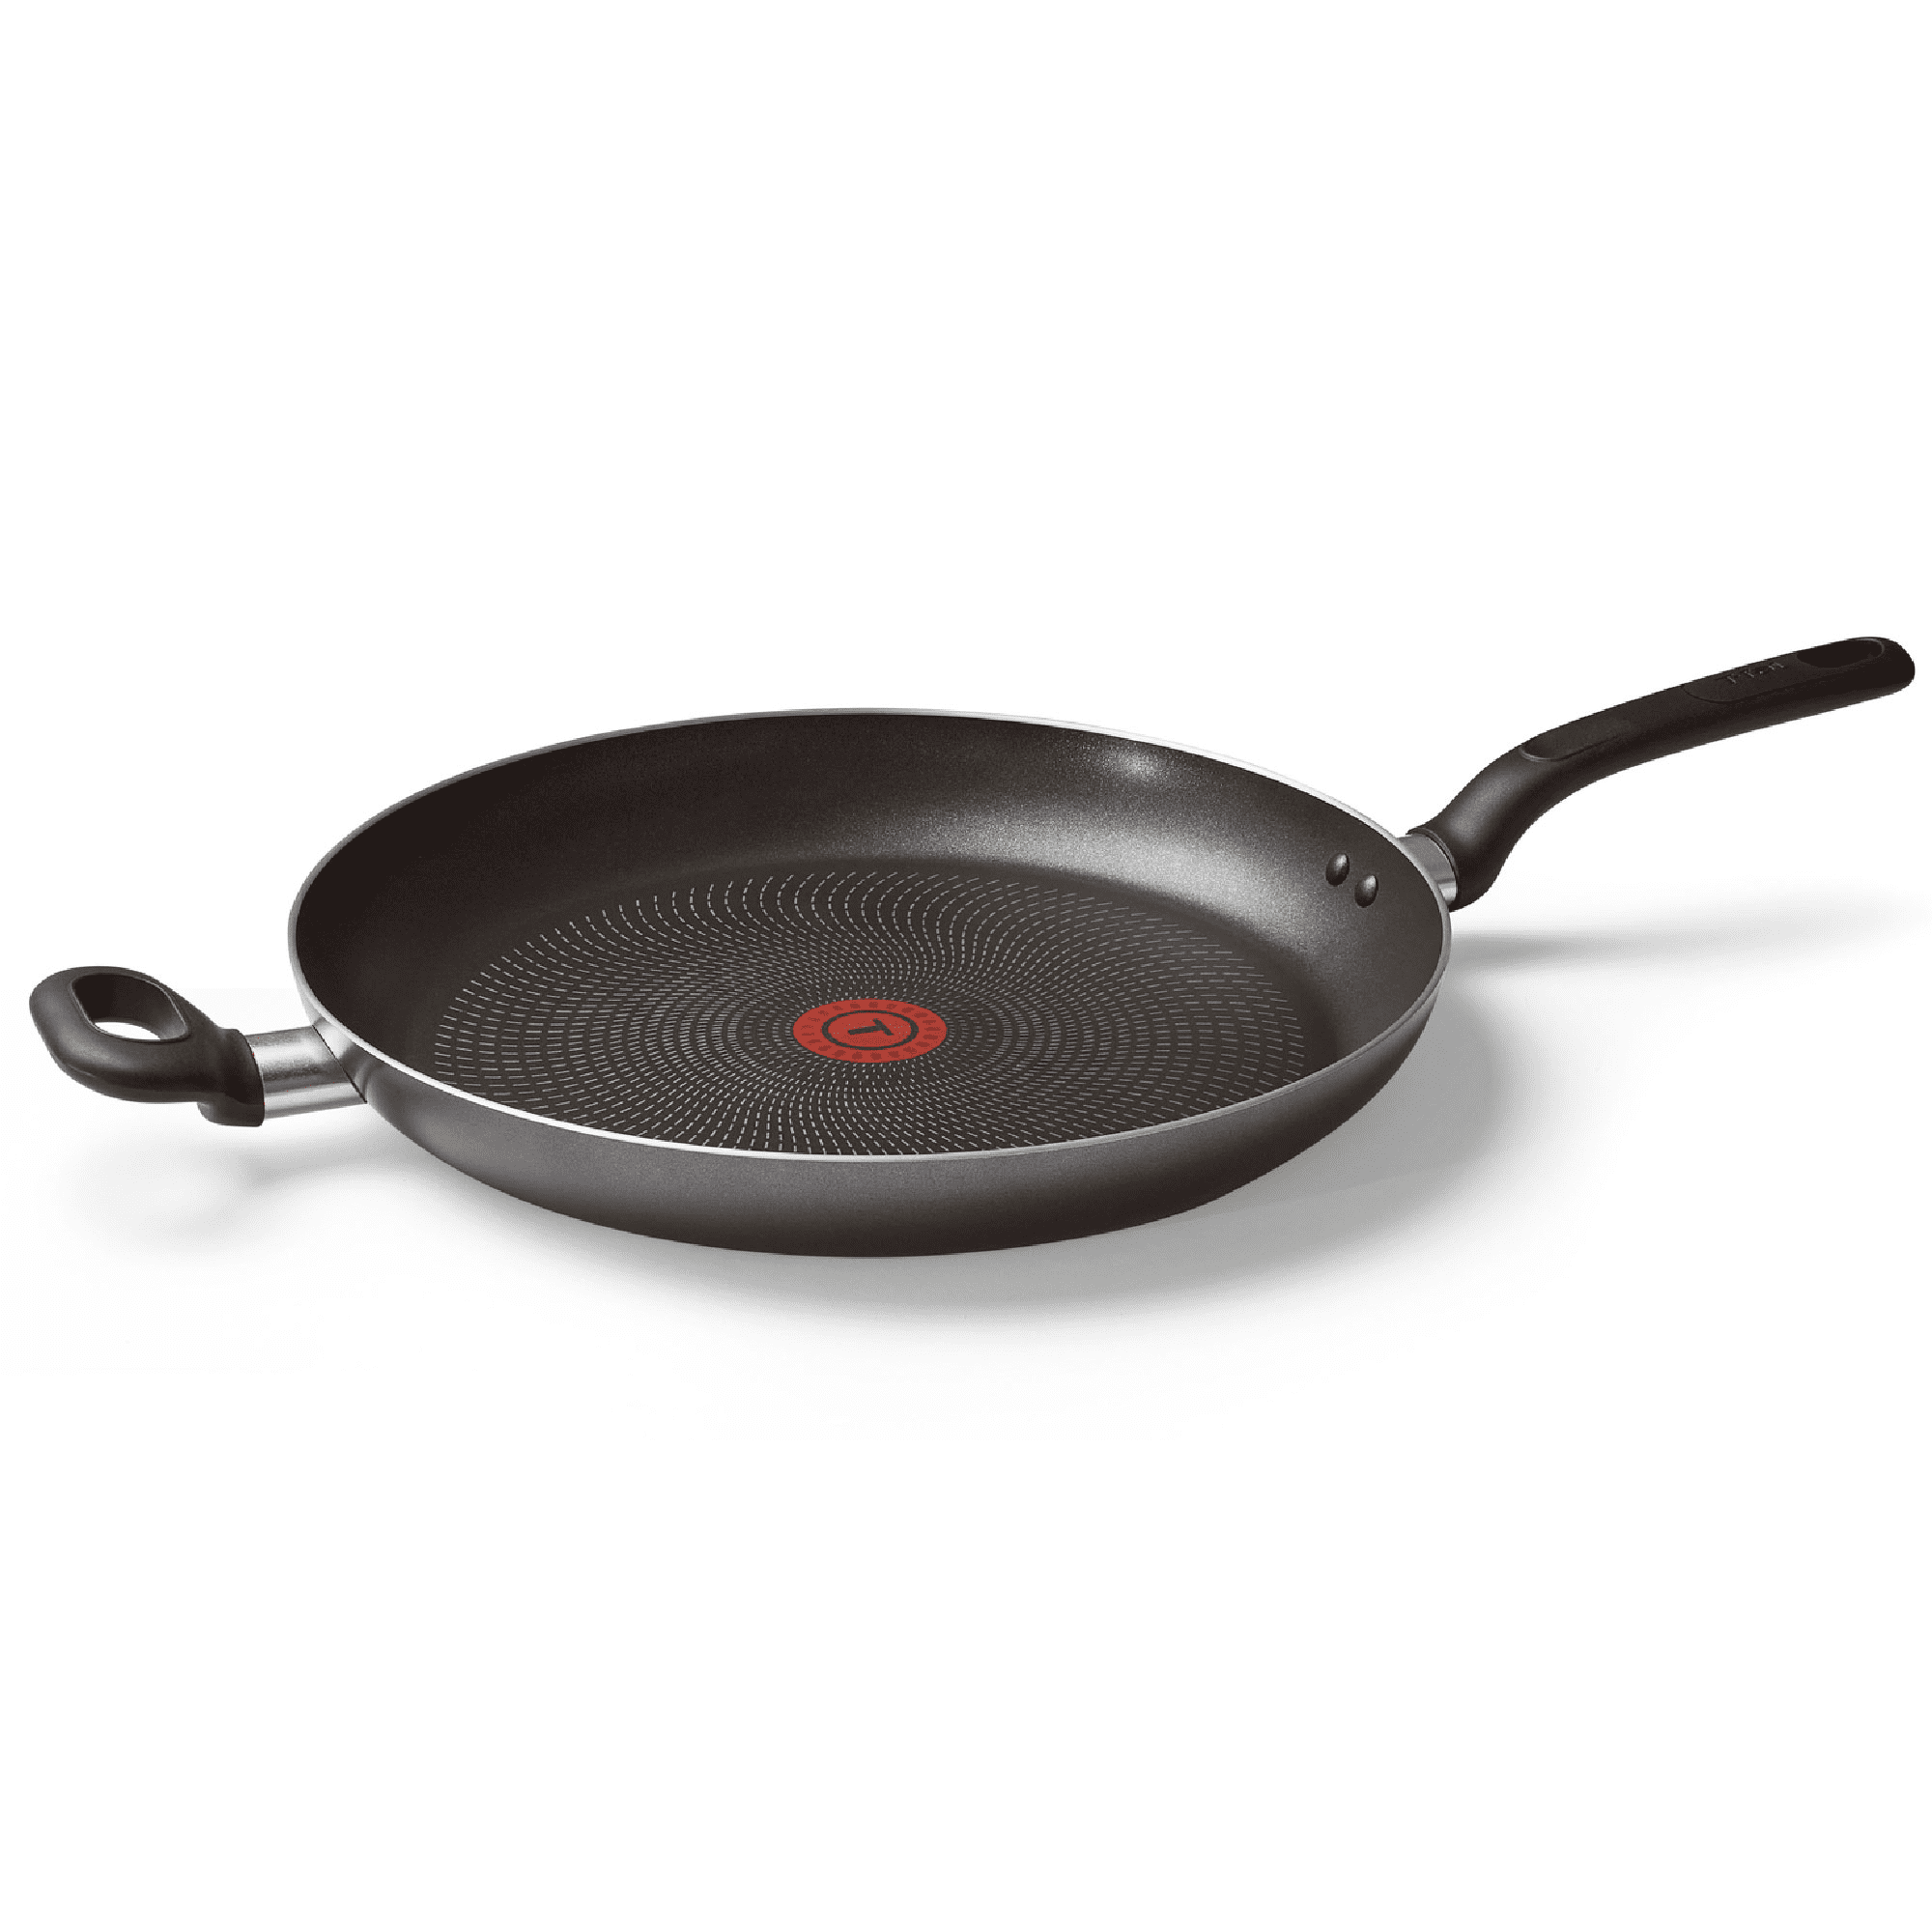 T-fal Easy Care Nonstick Cookware, 13.25 inch Family Fry Pan, Black